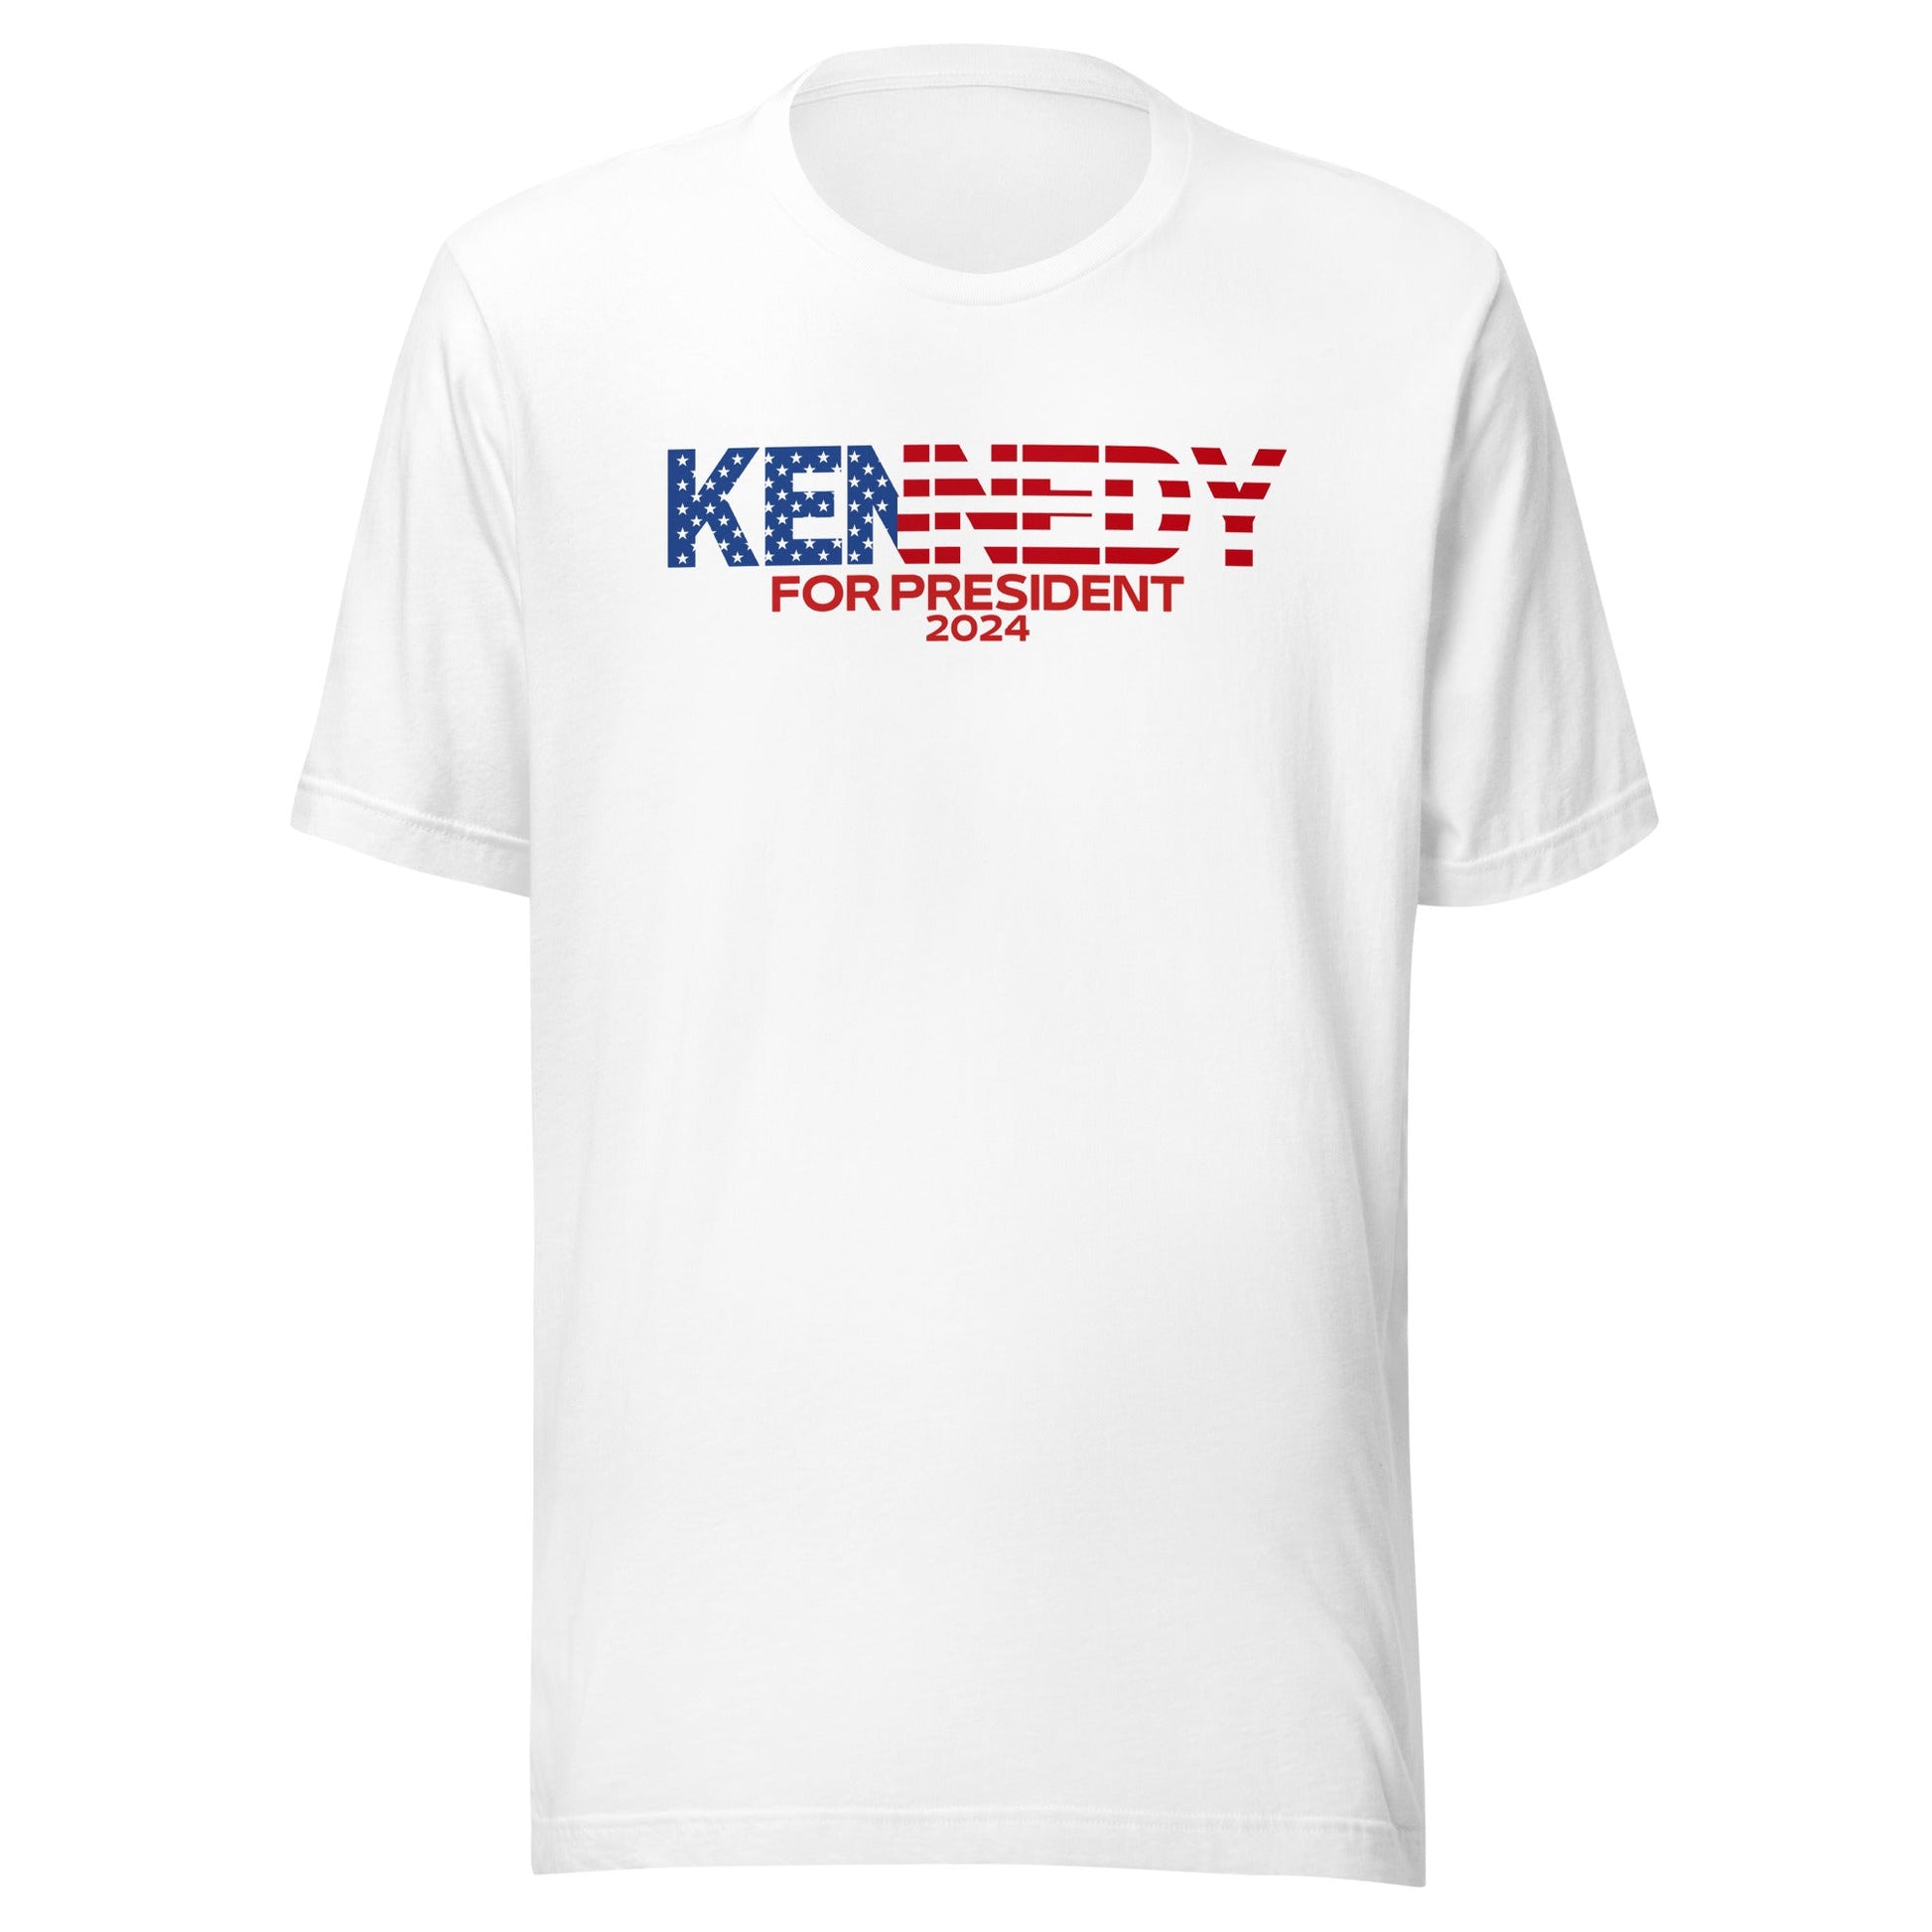 Kennedy Flag Unisex Tee - TEAM KENNEDY. All rights reserved